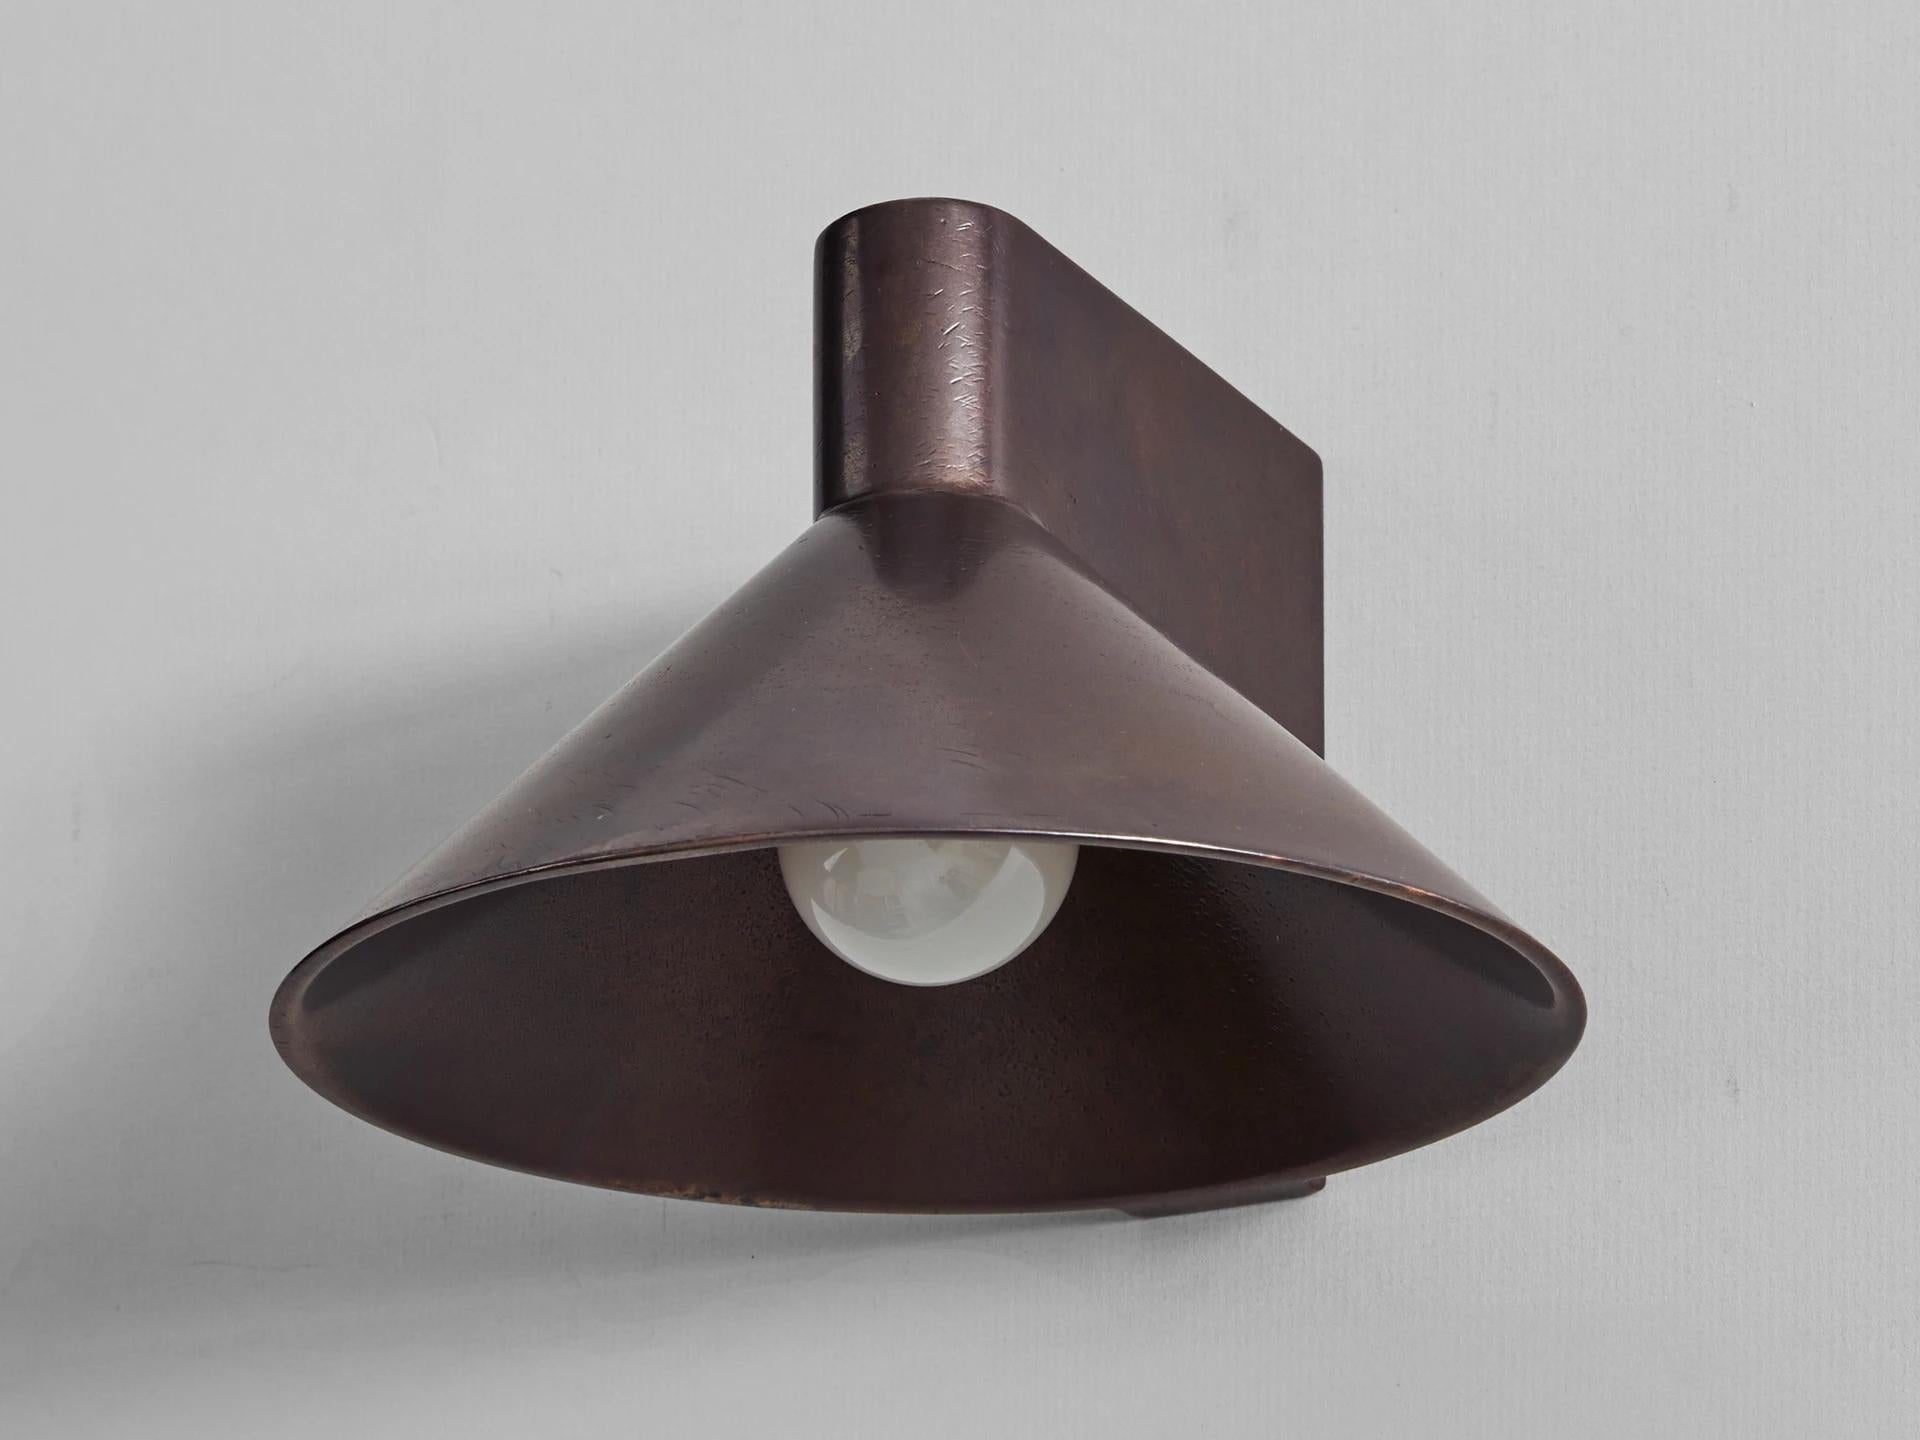 Blackened Bronze Conical Up Wall Light by Henry Wilson
Dimensions: W 19 x D 20 x H 12 cm
Materials: Bronze

Lost wax cast in solid bronze, the conical wall light is our most complex production casting to date. Each piece is hand finished and can be